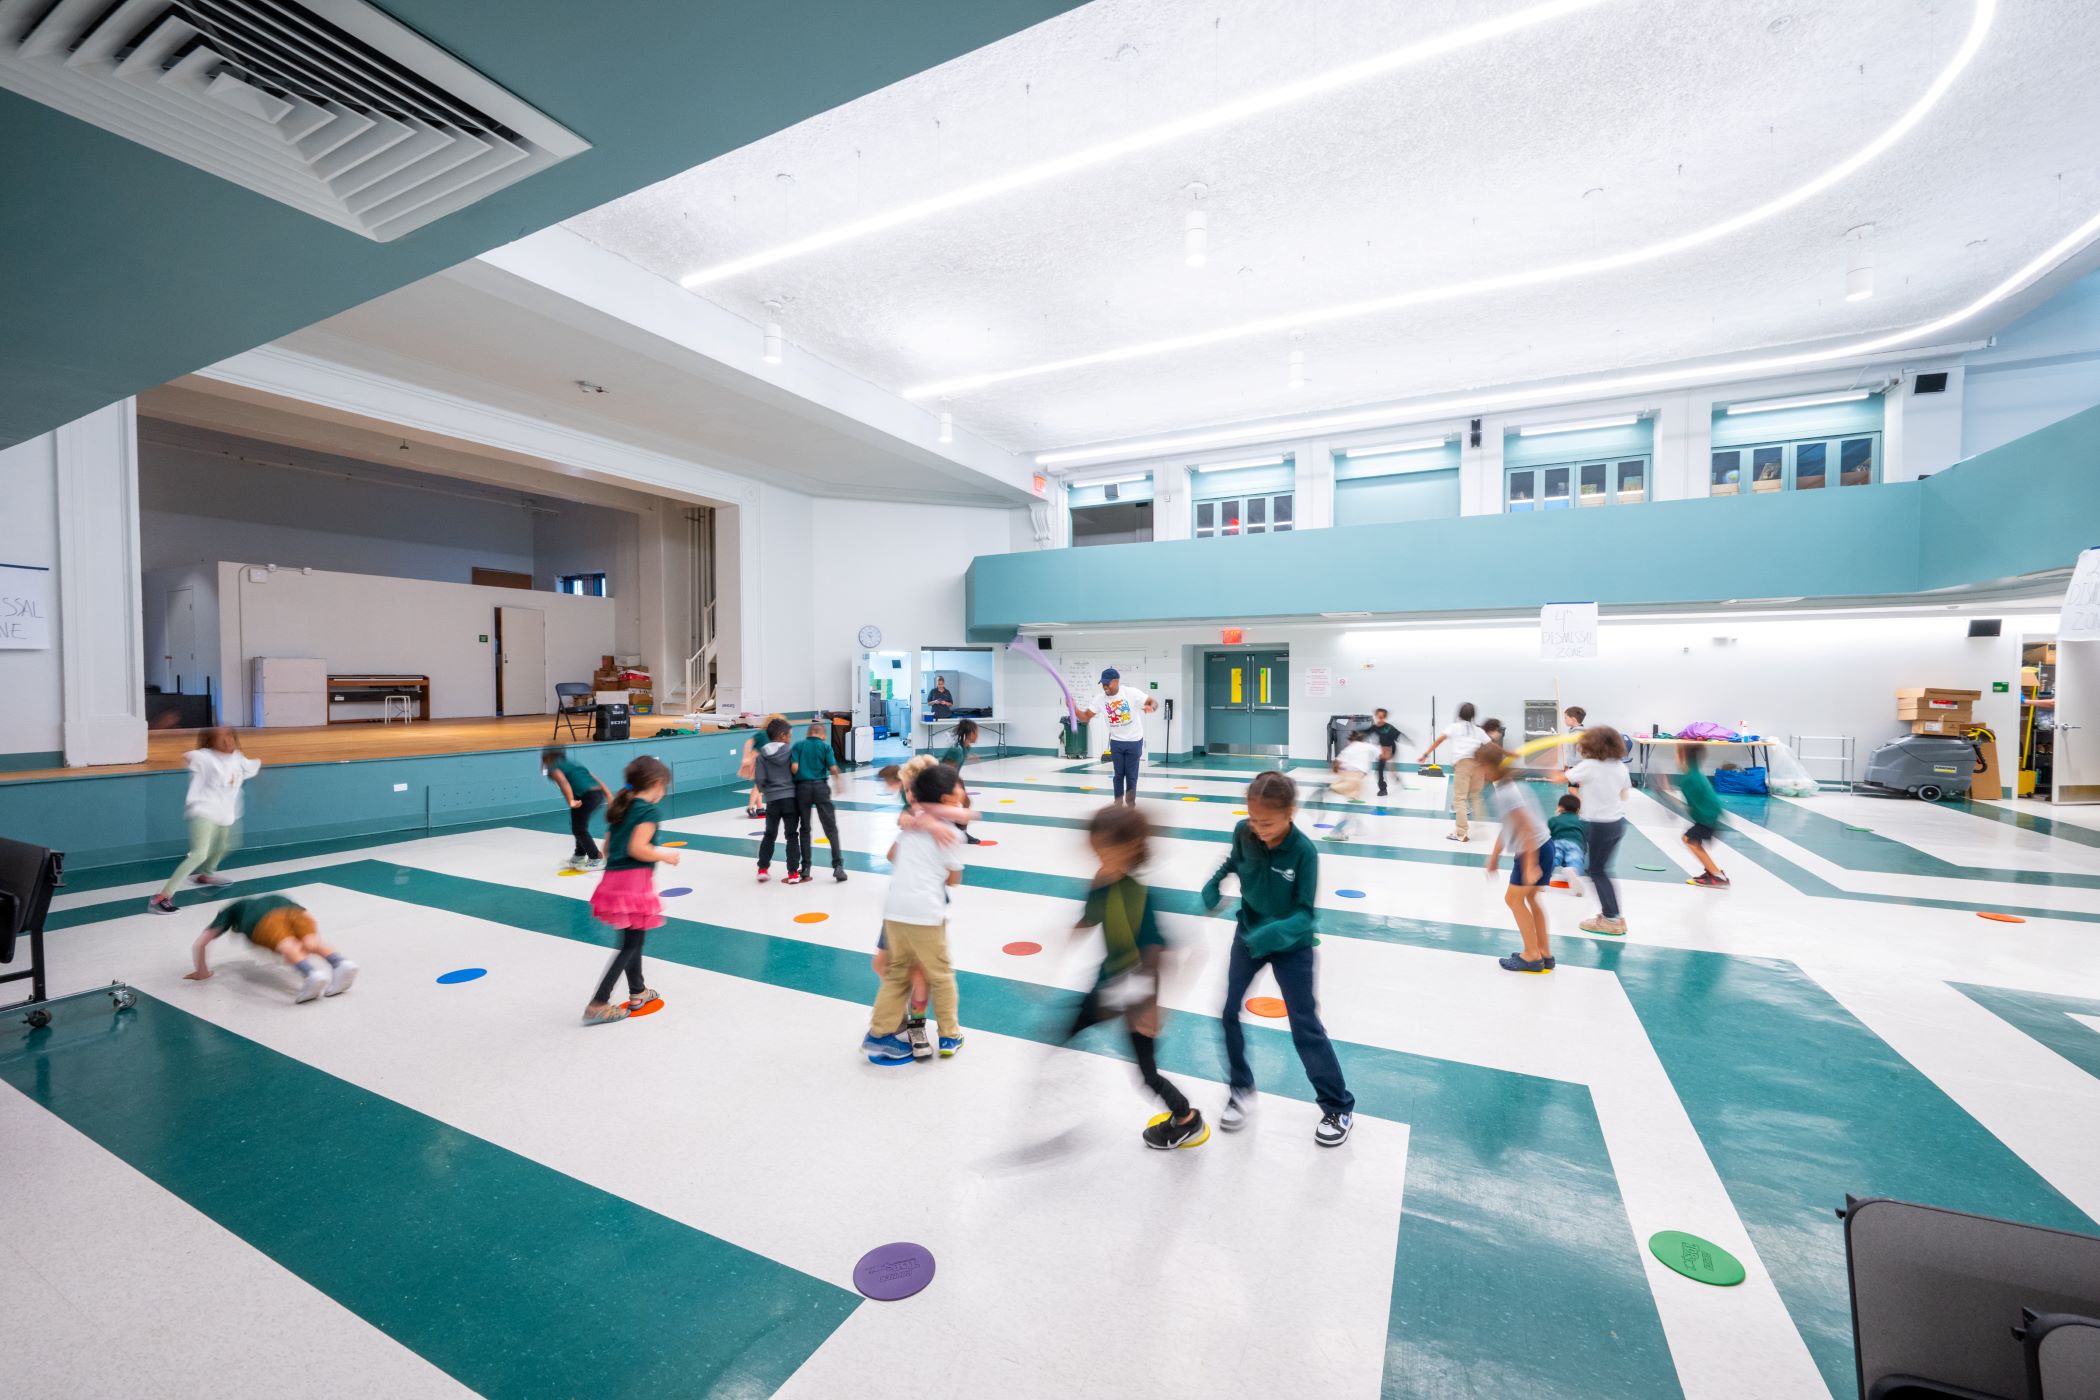 kids playing in a brightly lit gym with a patterned floor in blue and white